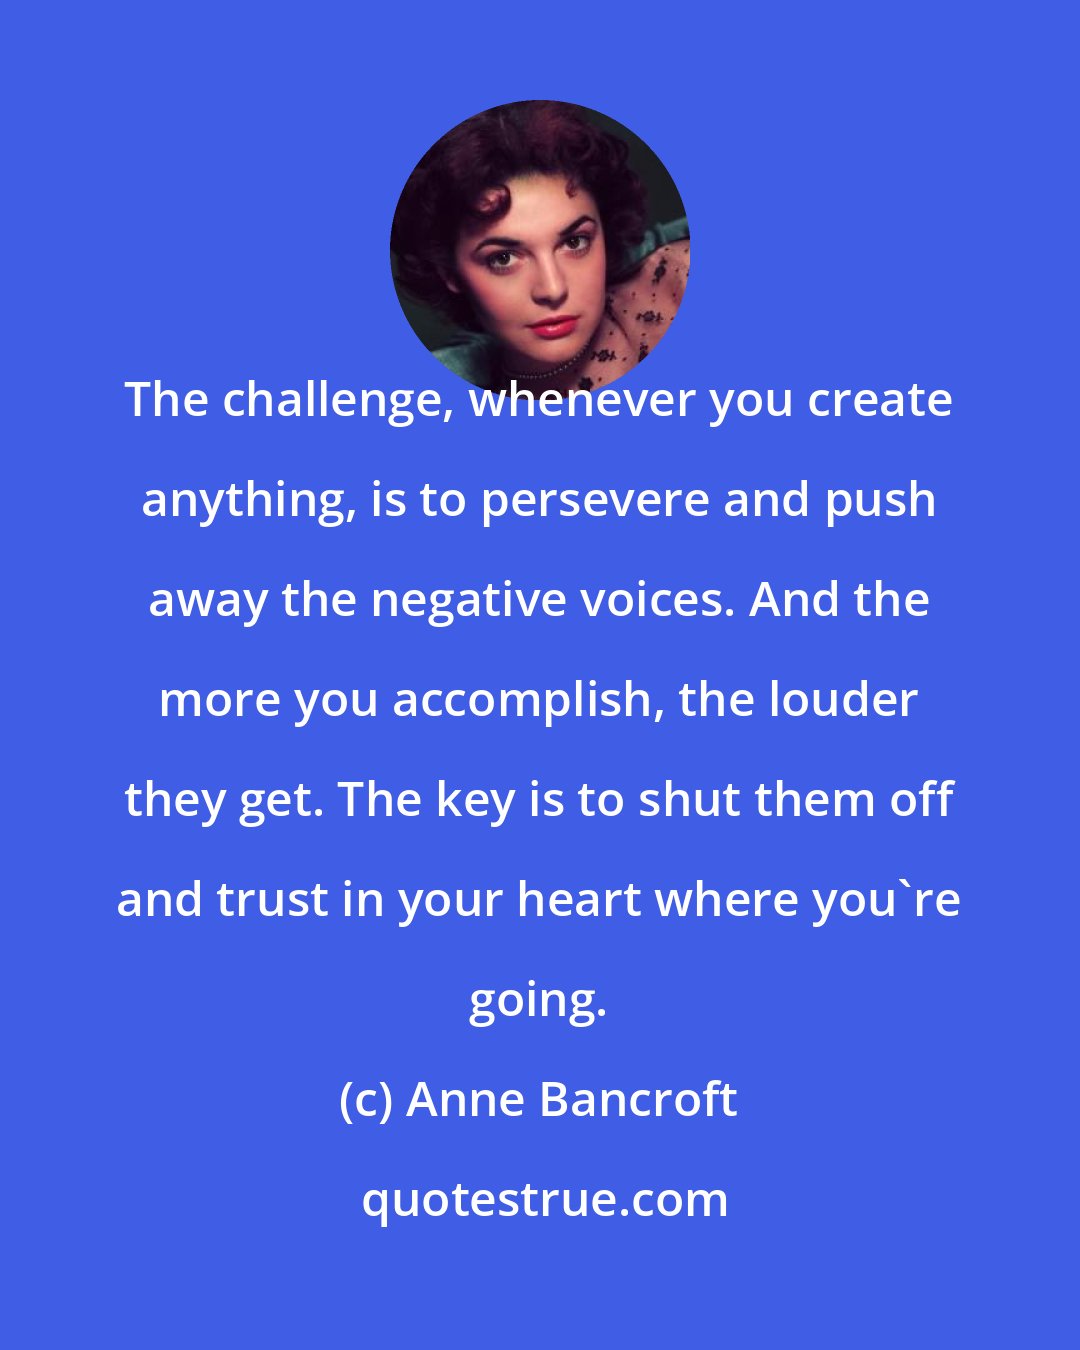 Anne Bancroft: The challenge, whenever you create anything, is to persevere and push away the negative voices. And the more you accomplish, the louder they get. The key is to shut them off and trust in your heart where you're going.